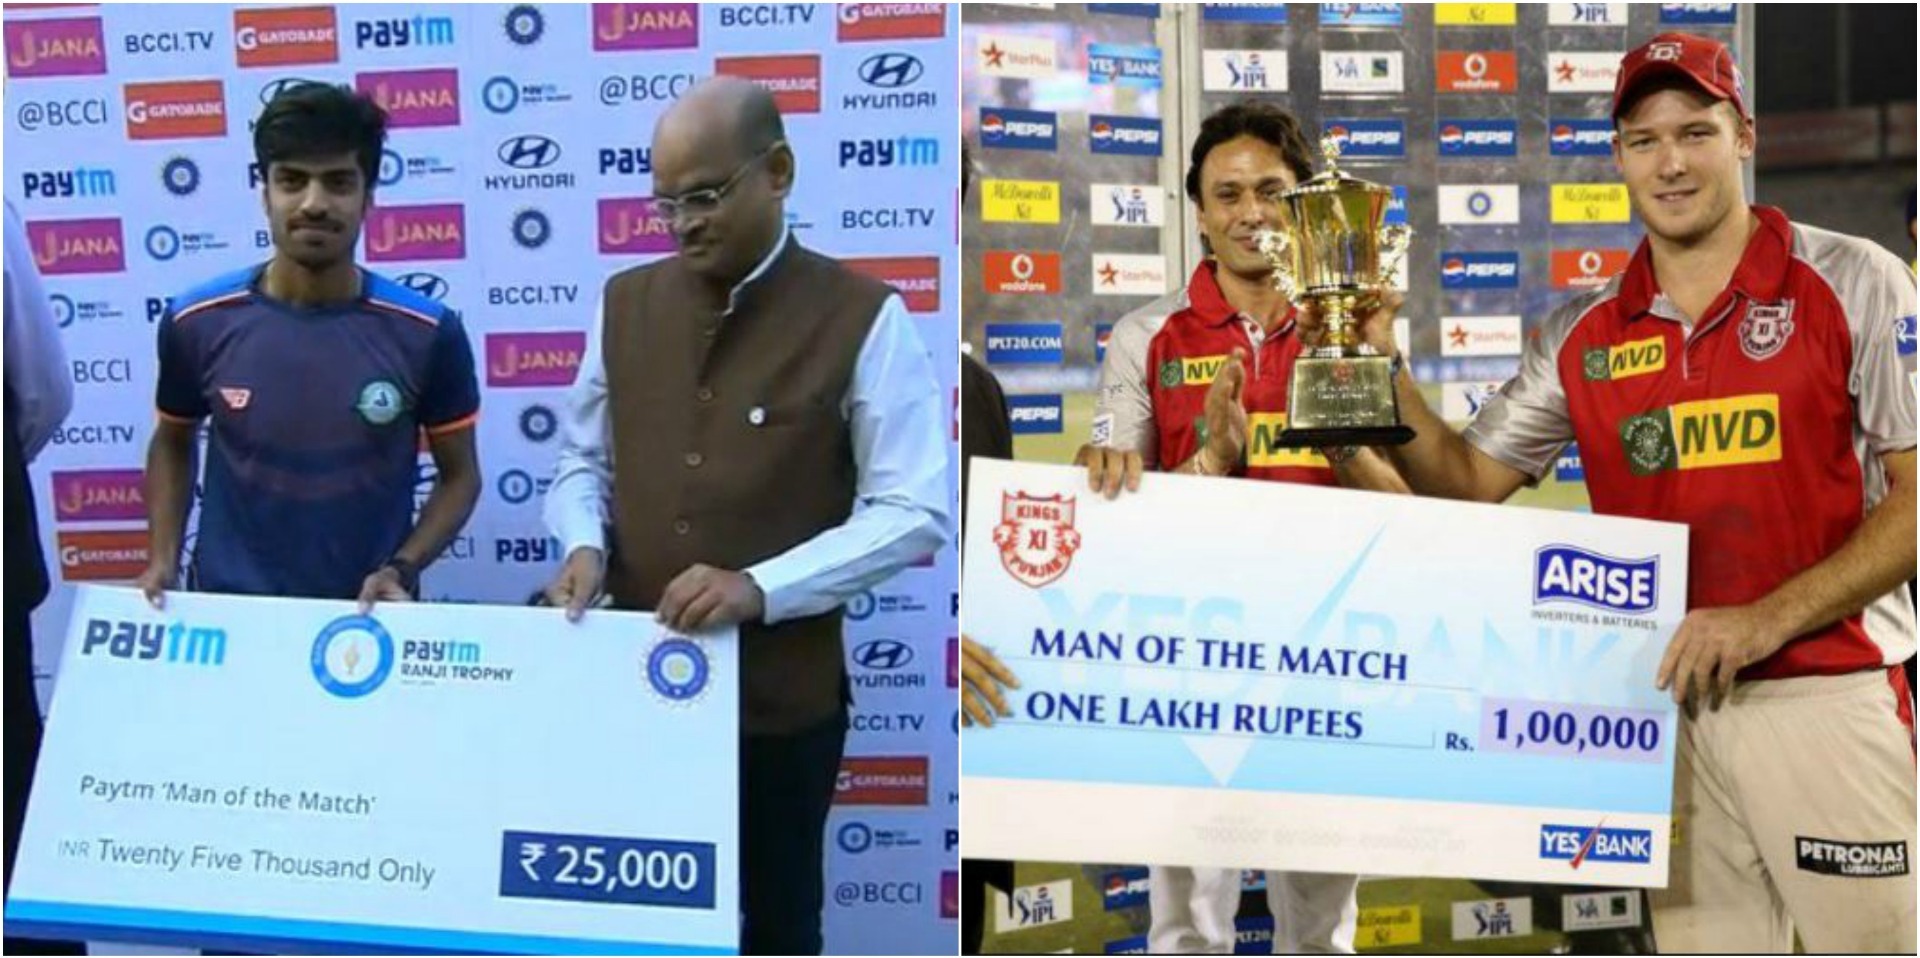 1 lakh for IPL, 25 thousand for Ranji final, is BCCI going the right way? 1 lakh for IPL, 25 thousand for Ranji final, is BCCI going the right way?